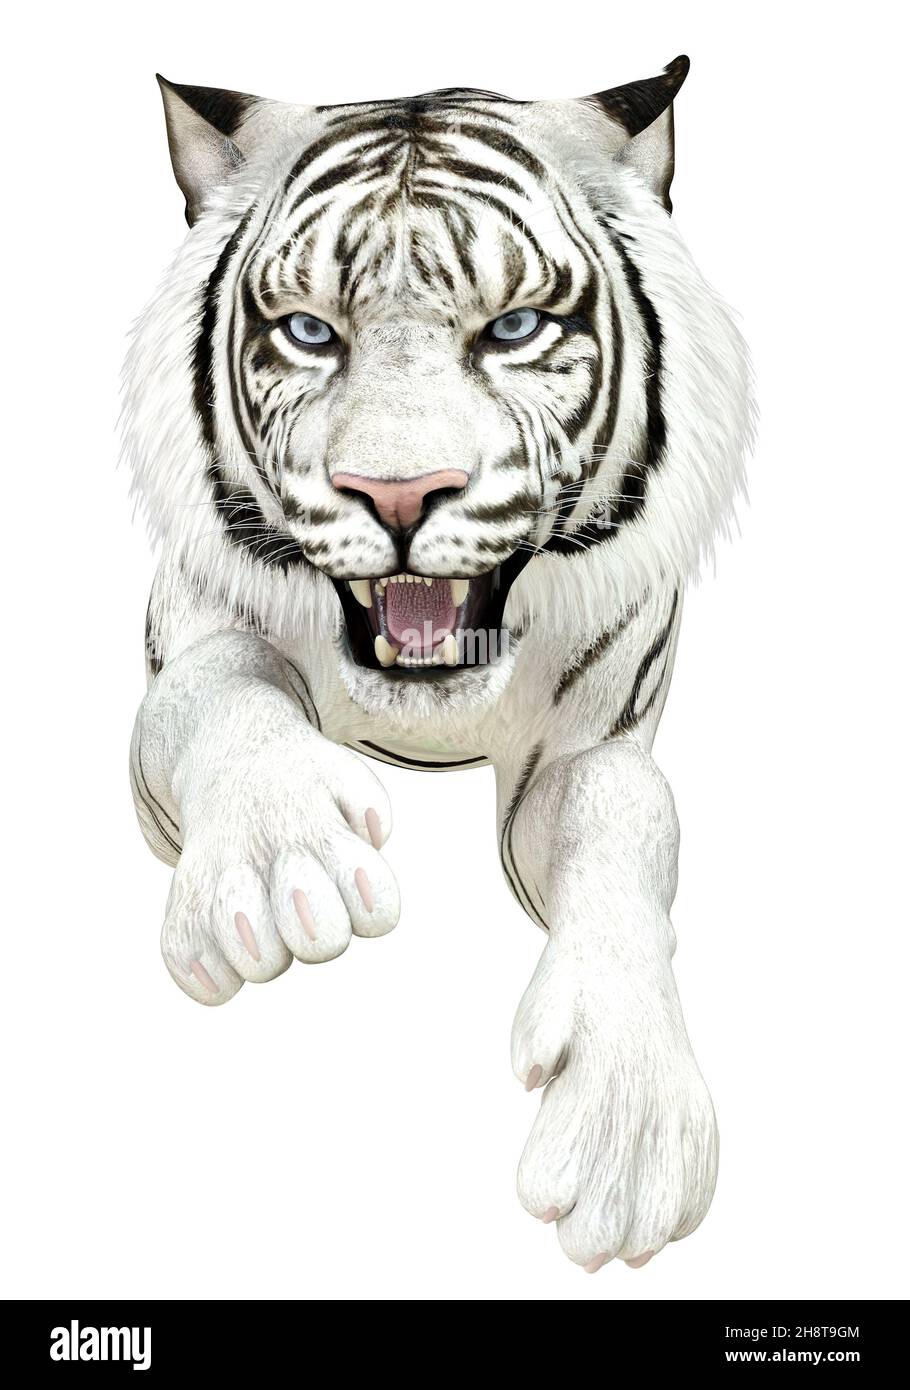 White tiger india Cut Out Stock Images & Pictures - Page 2 - Alamy